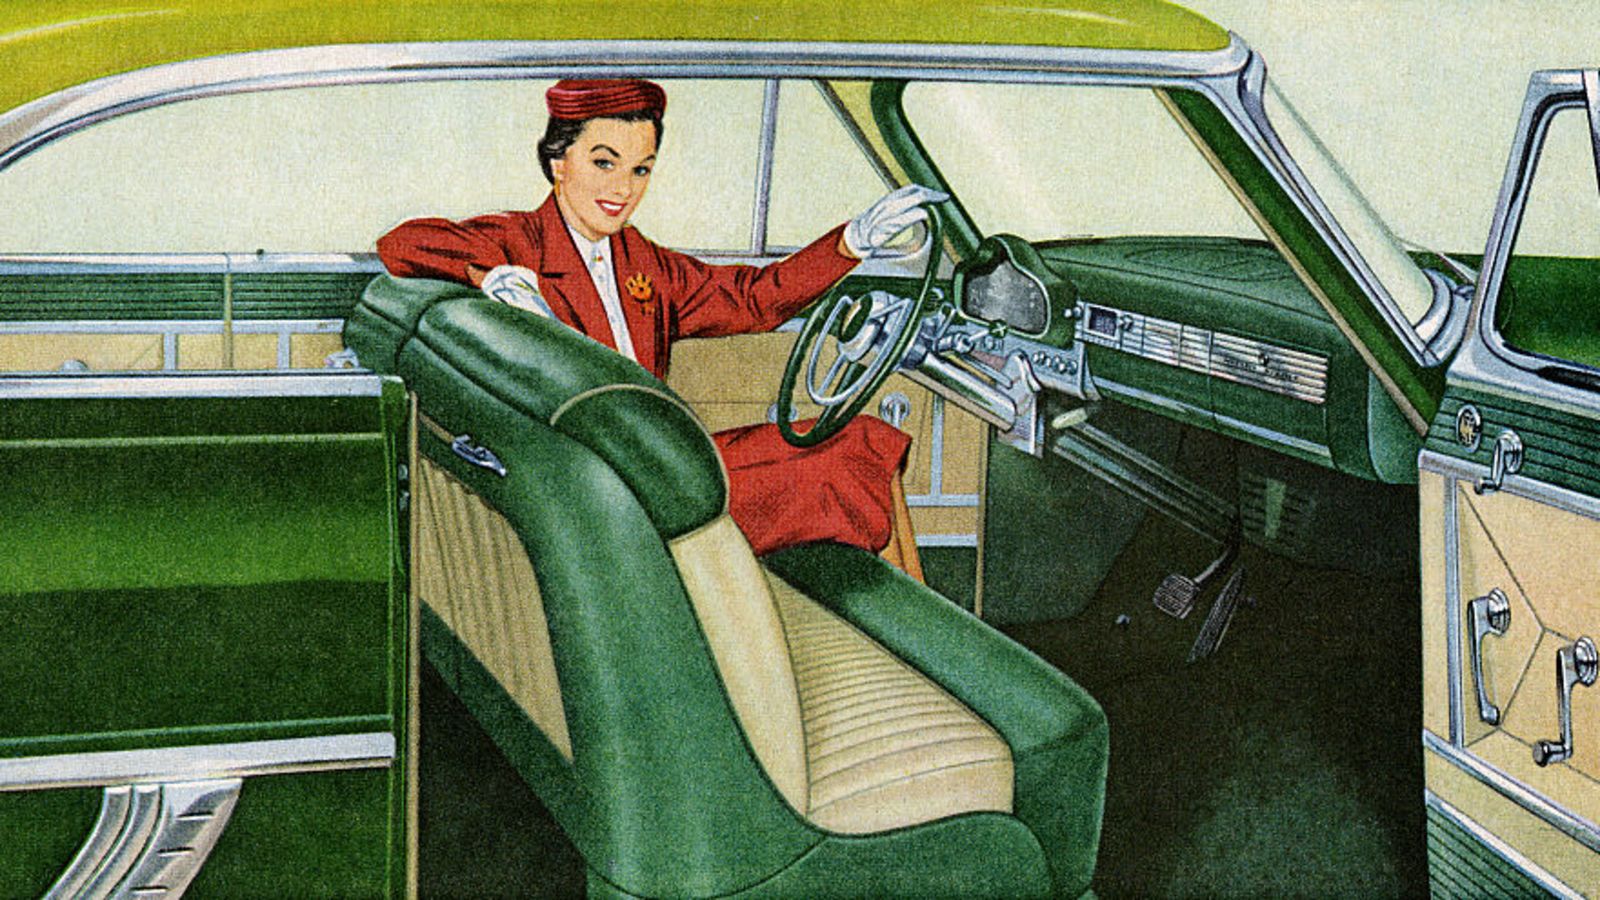 Illustration for article titled Bench seat comeback in EVs?